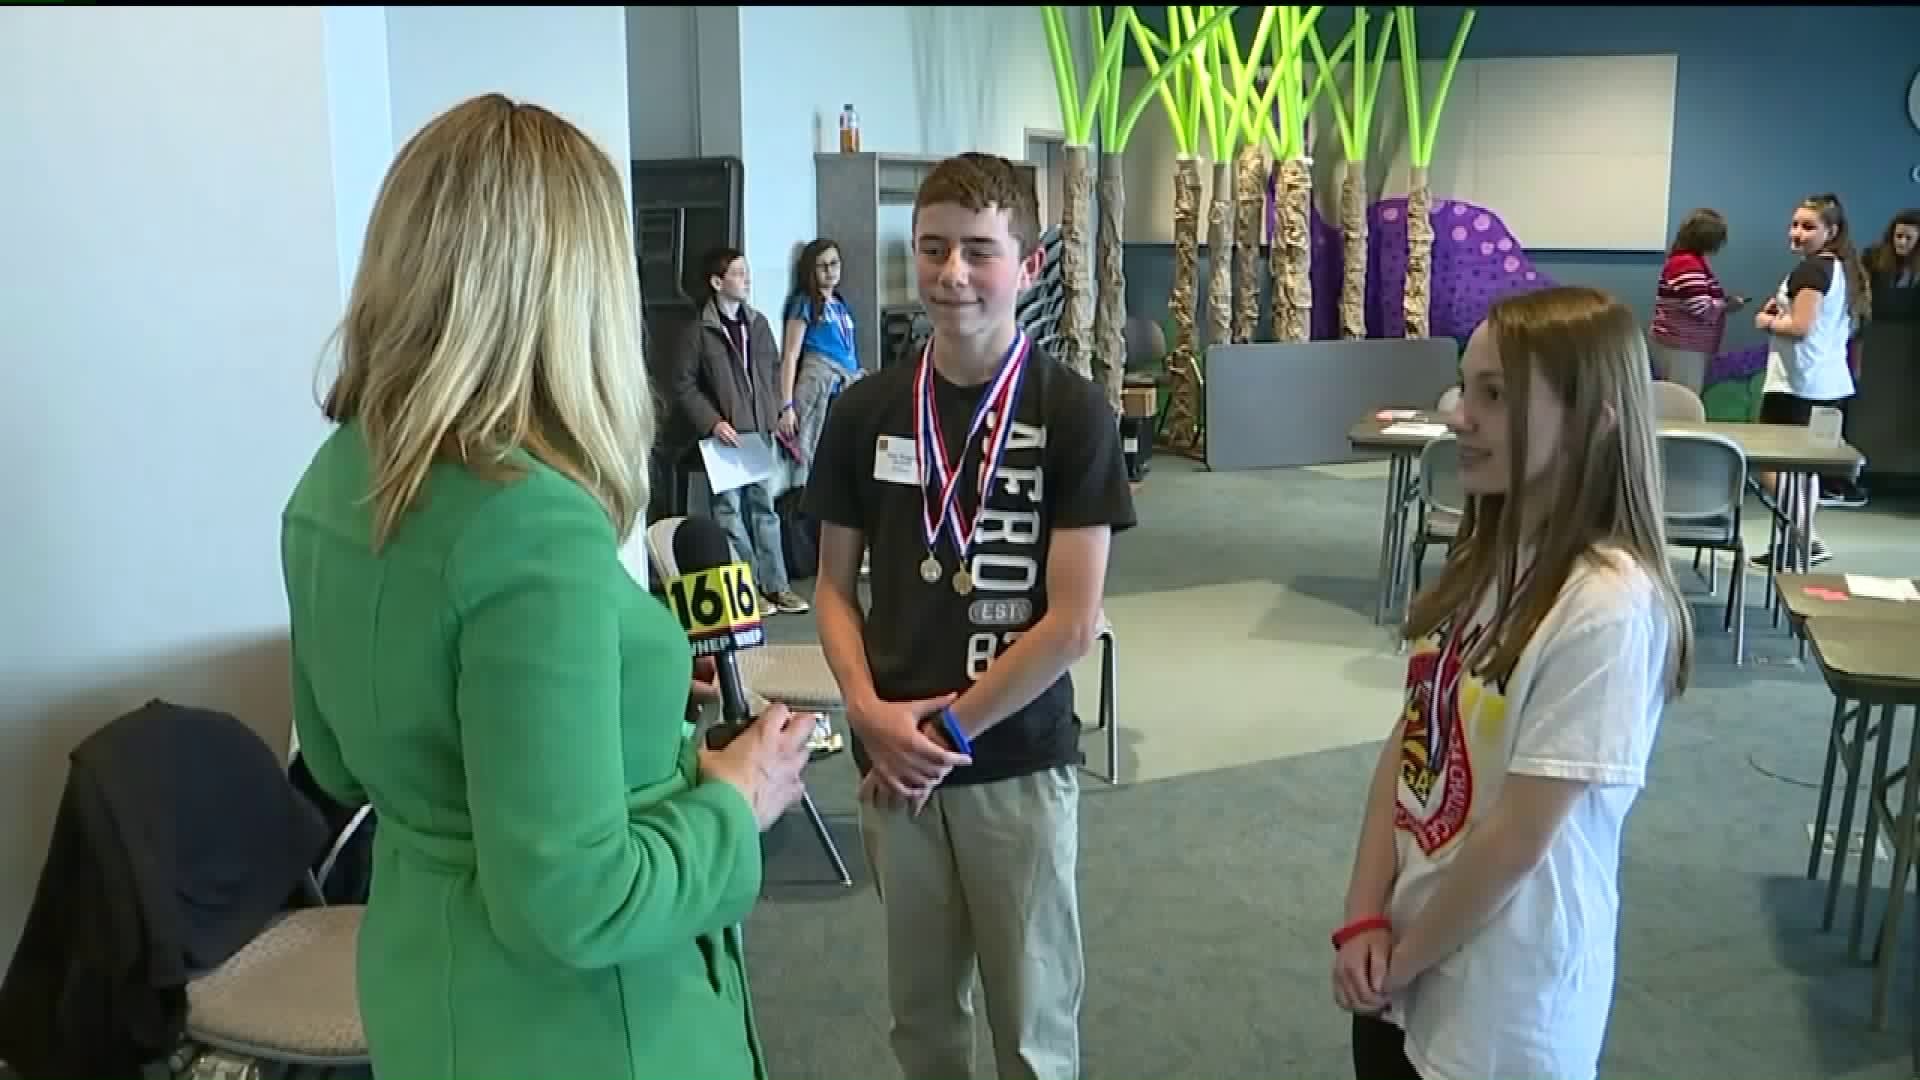 Students Compete in Math Contest